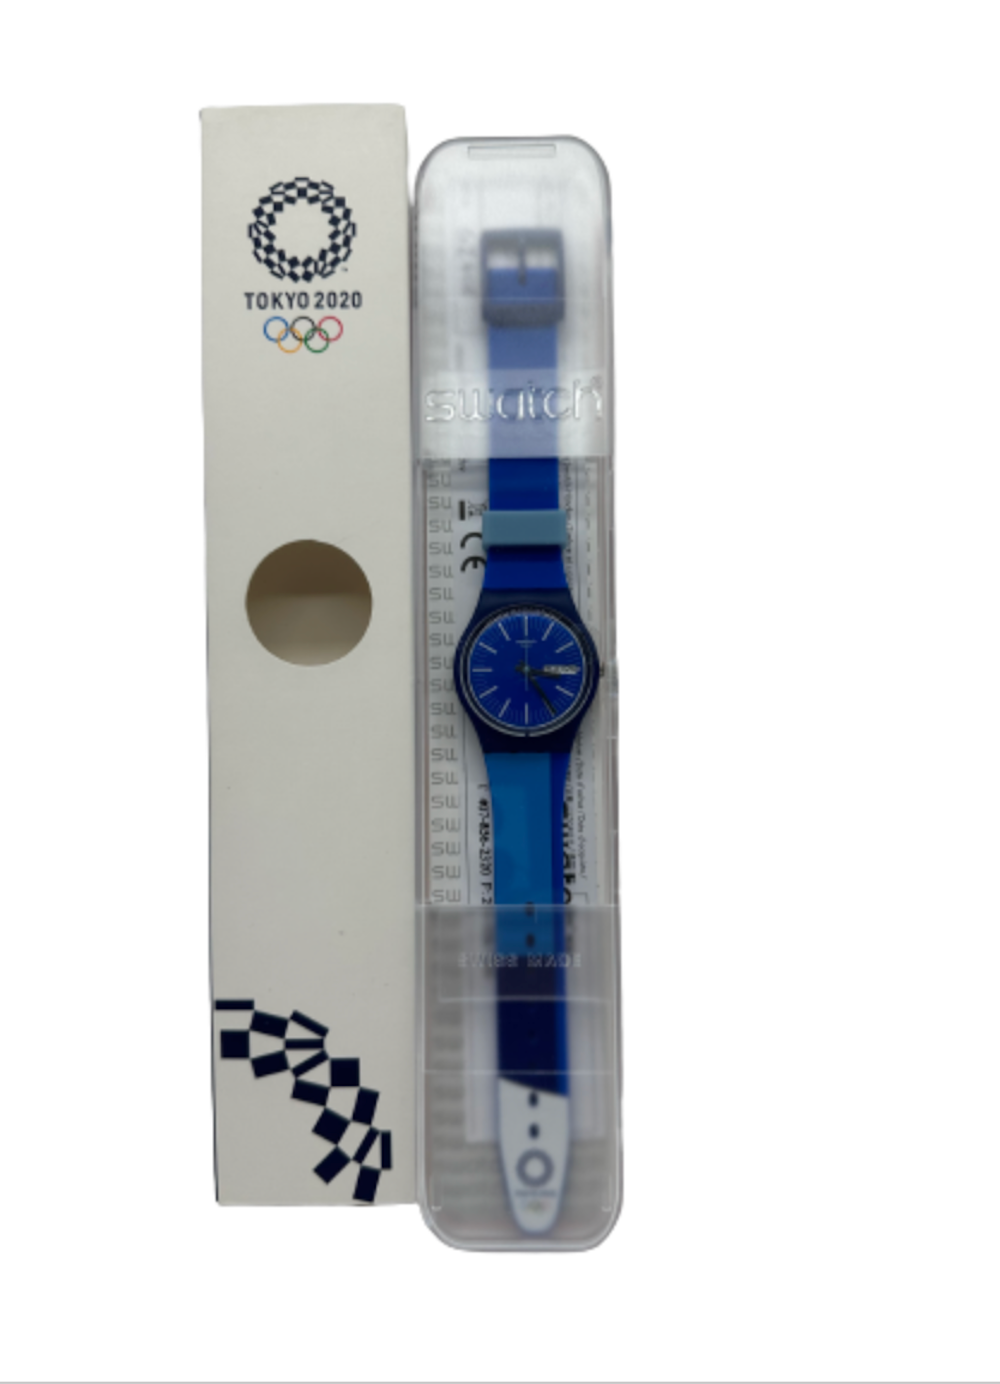 Swatch Olympic Game Tokyo 2020 Blue Watch New with Box